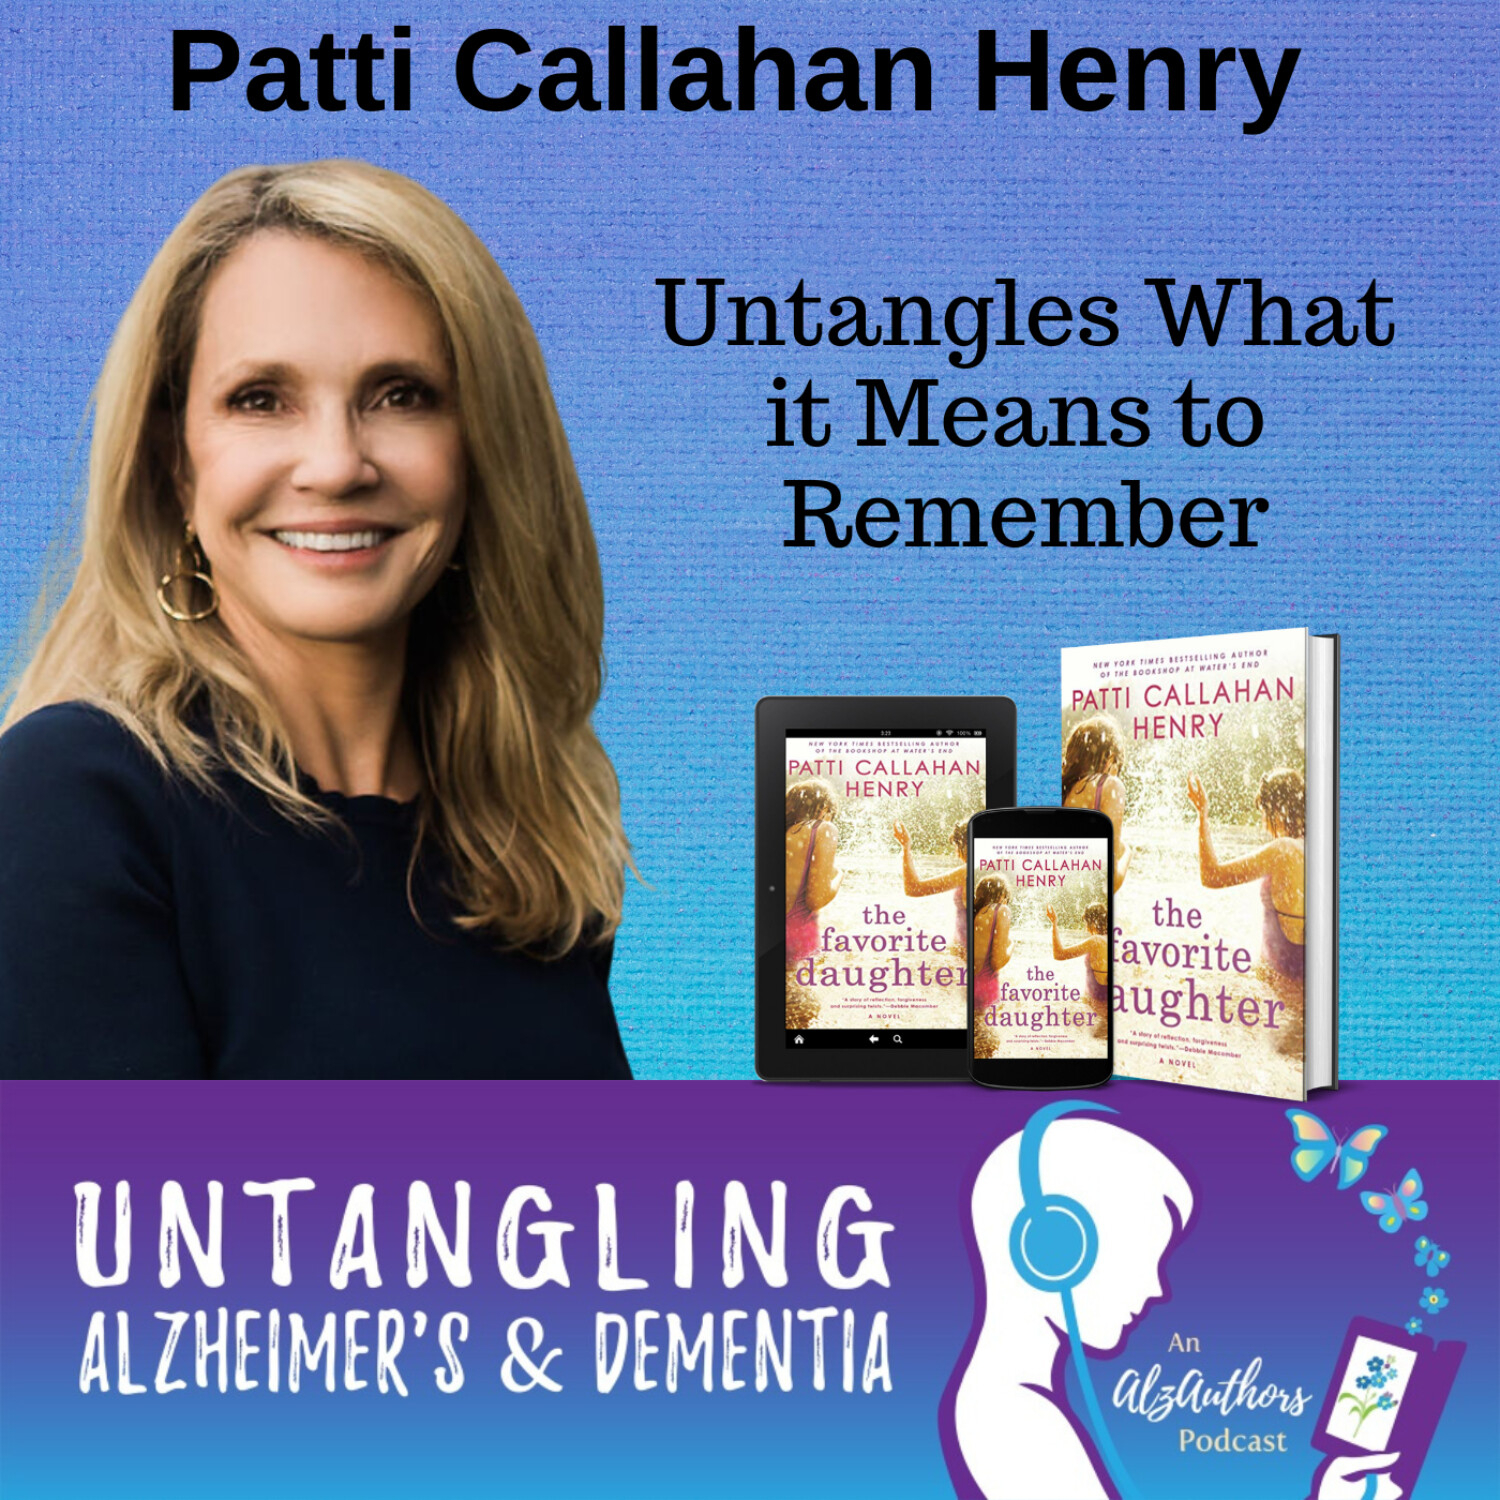 Patti Callahan Henry Untangles What it Means to Remember